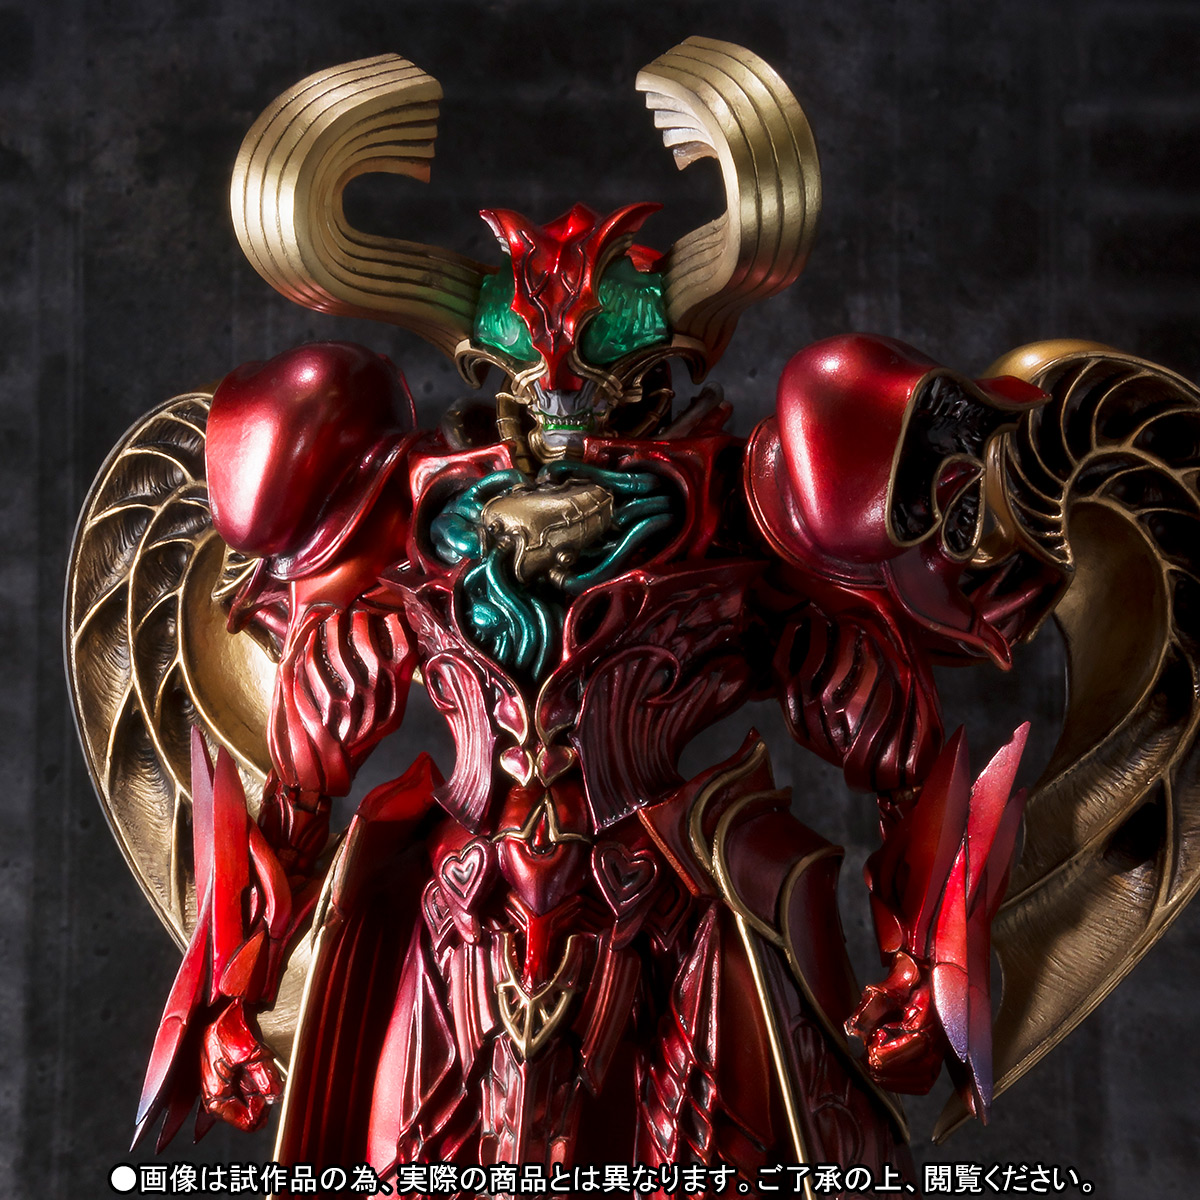 S.I.C. Heart Roidmude & S.H. Figuarts ZX Helldiver Official Images 